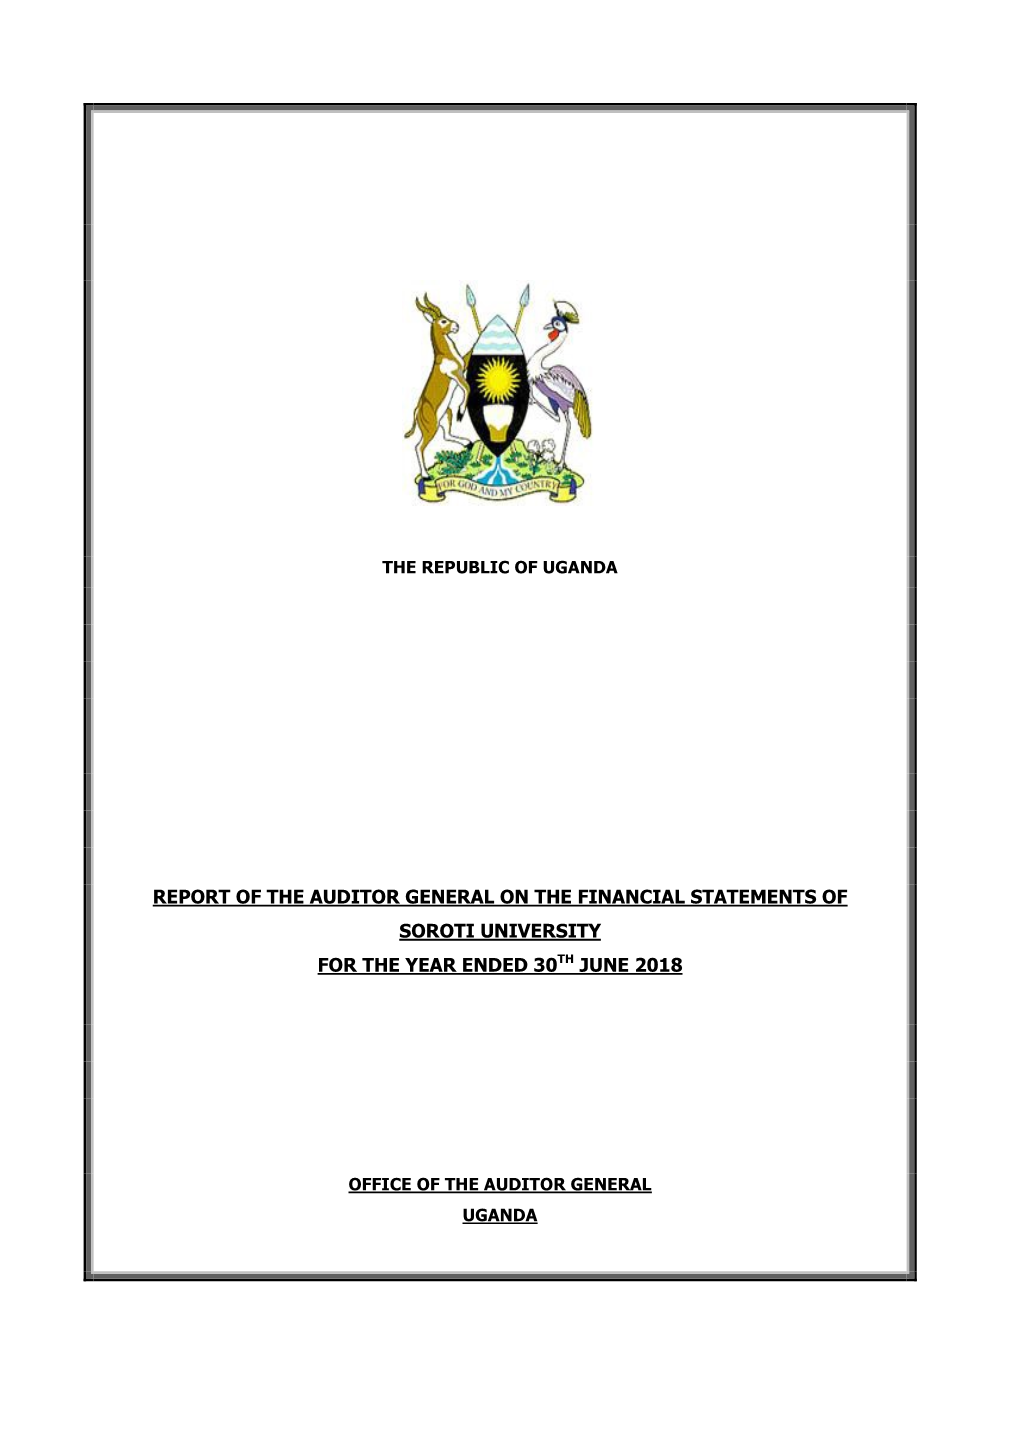 Report of the Auditor General on the Financial Statements of Soroti University for the Year Ended 30Th June 2018